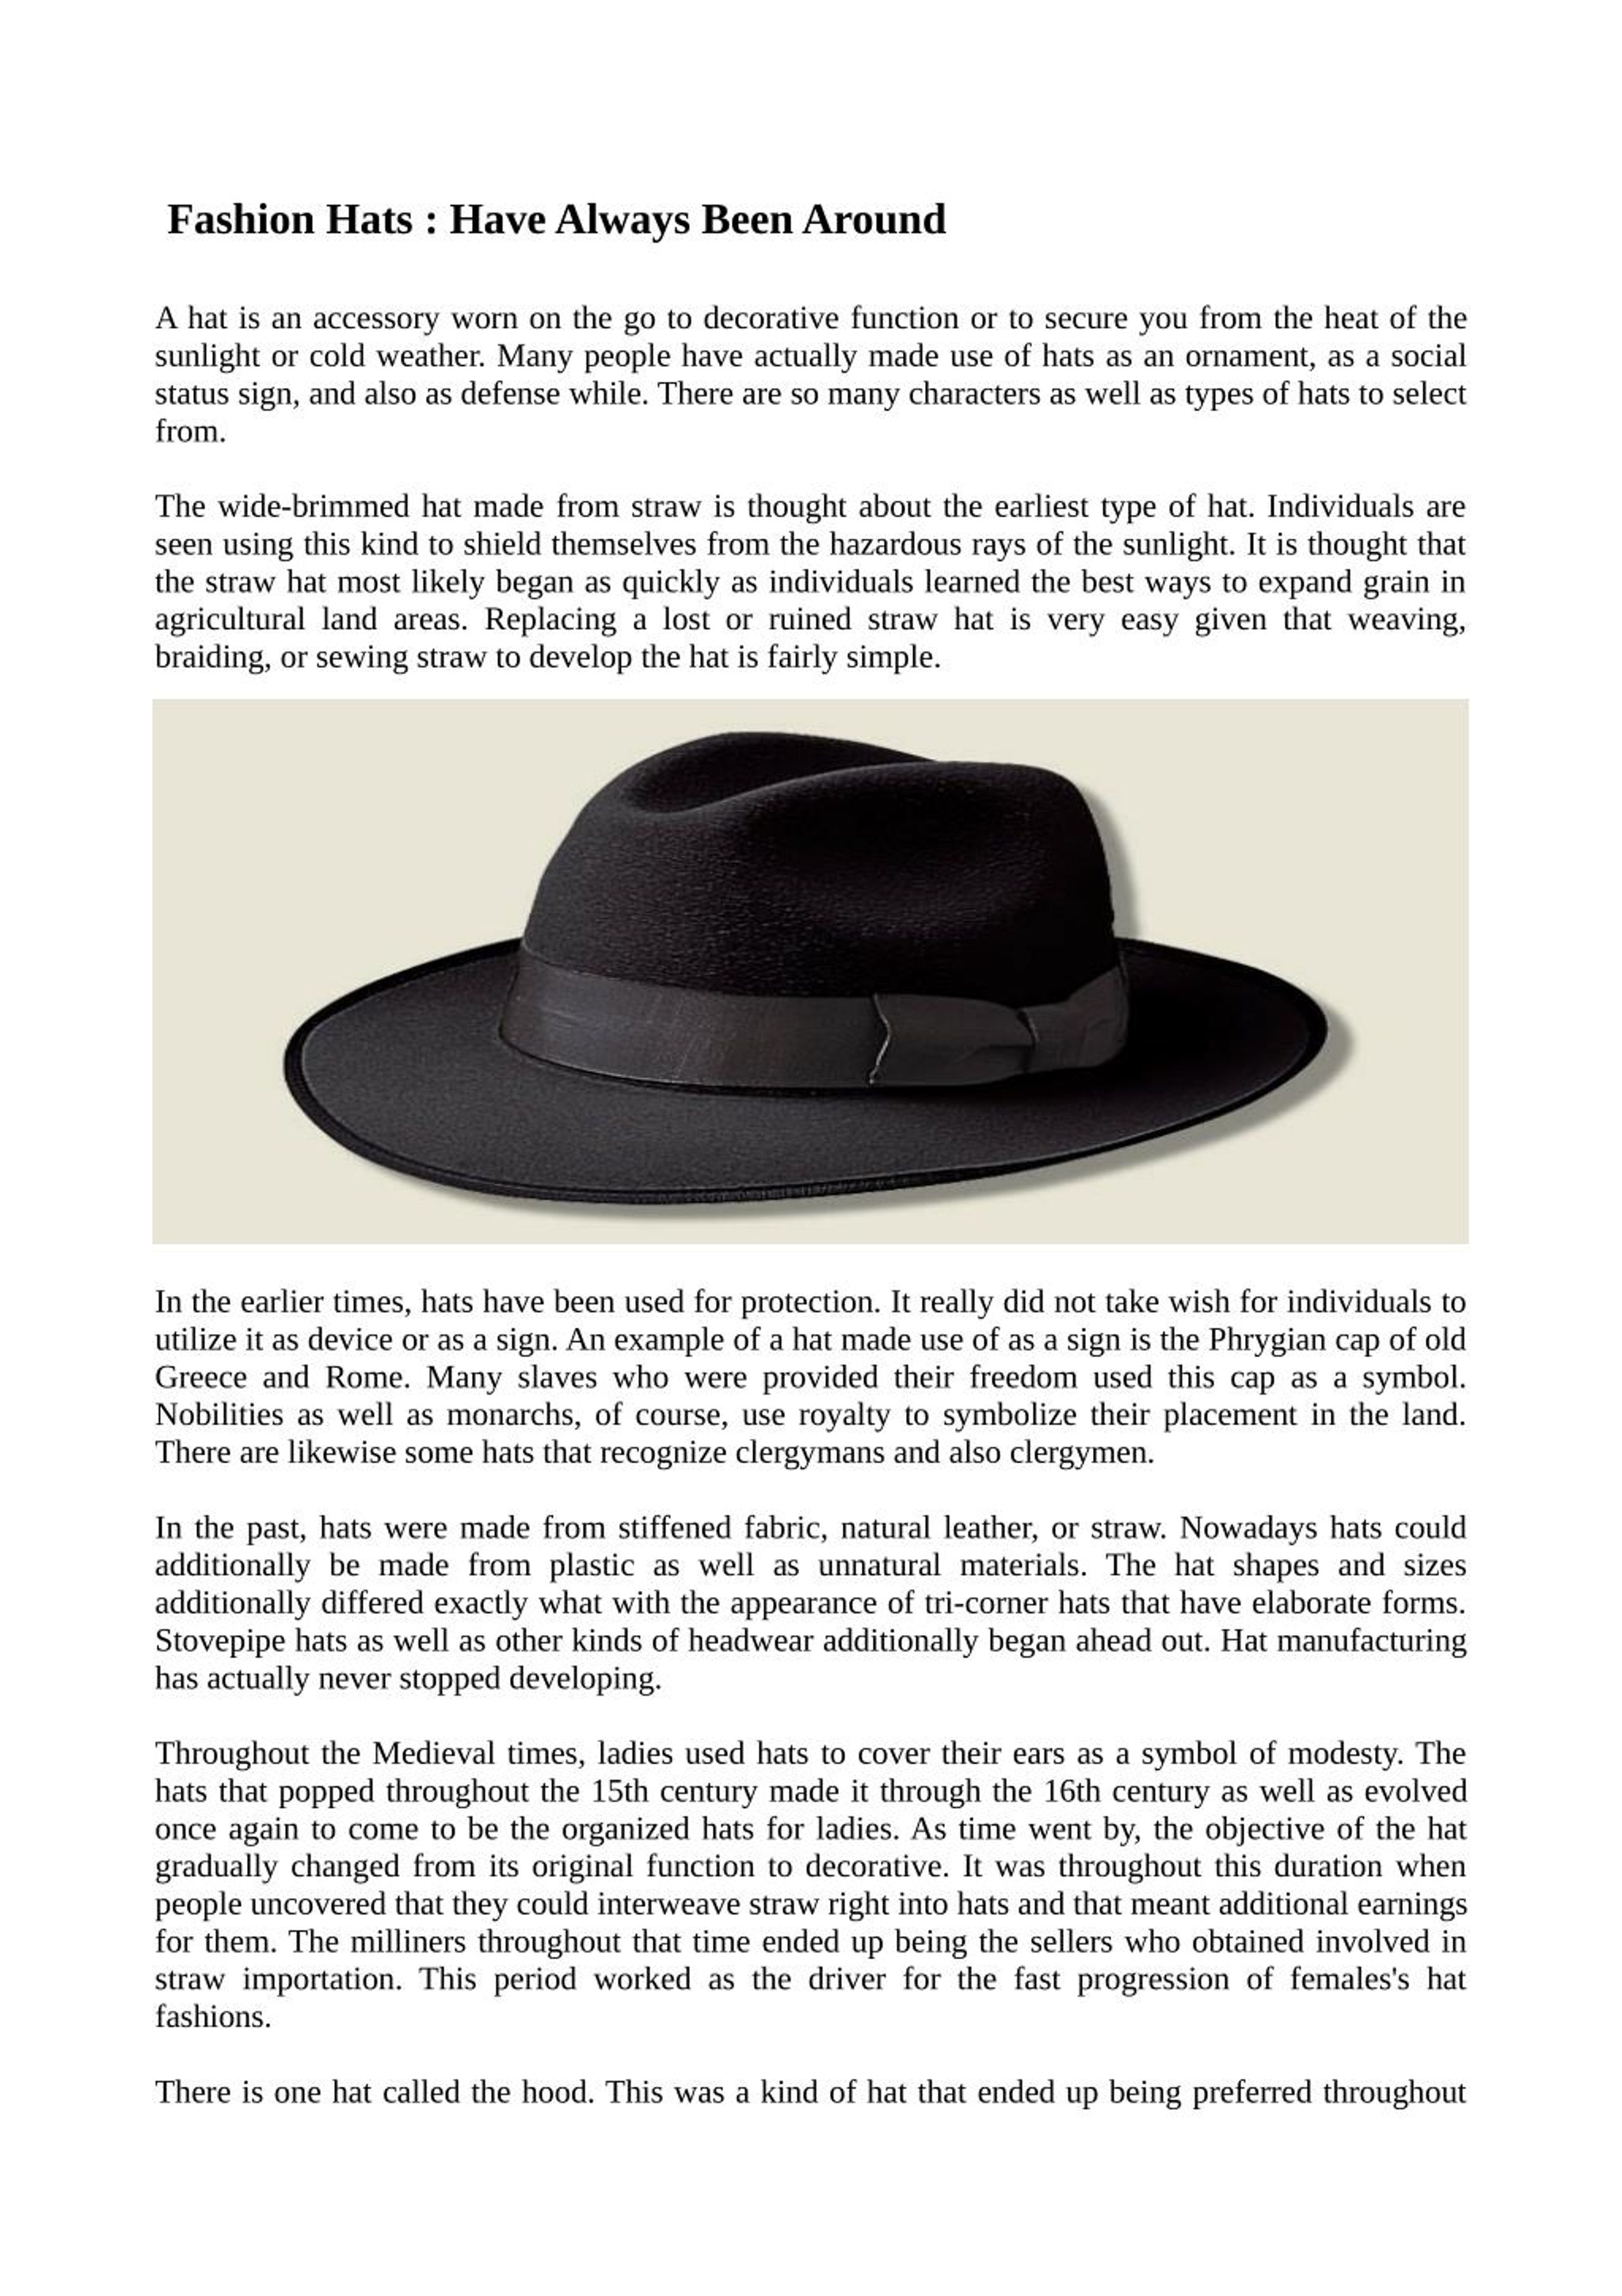 Kind hat. Kinds of hats. Different hats in English. Types of hats. Types of hats in English.